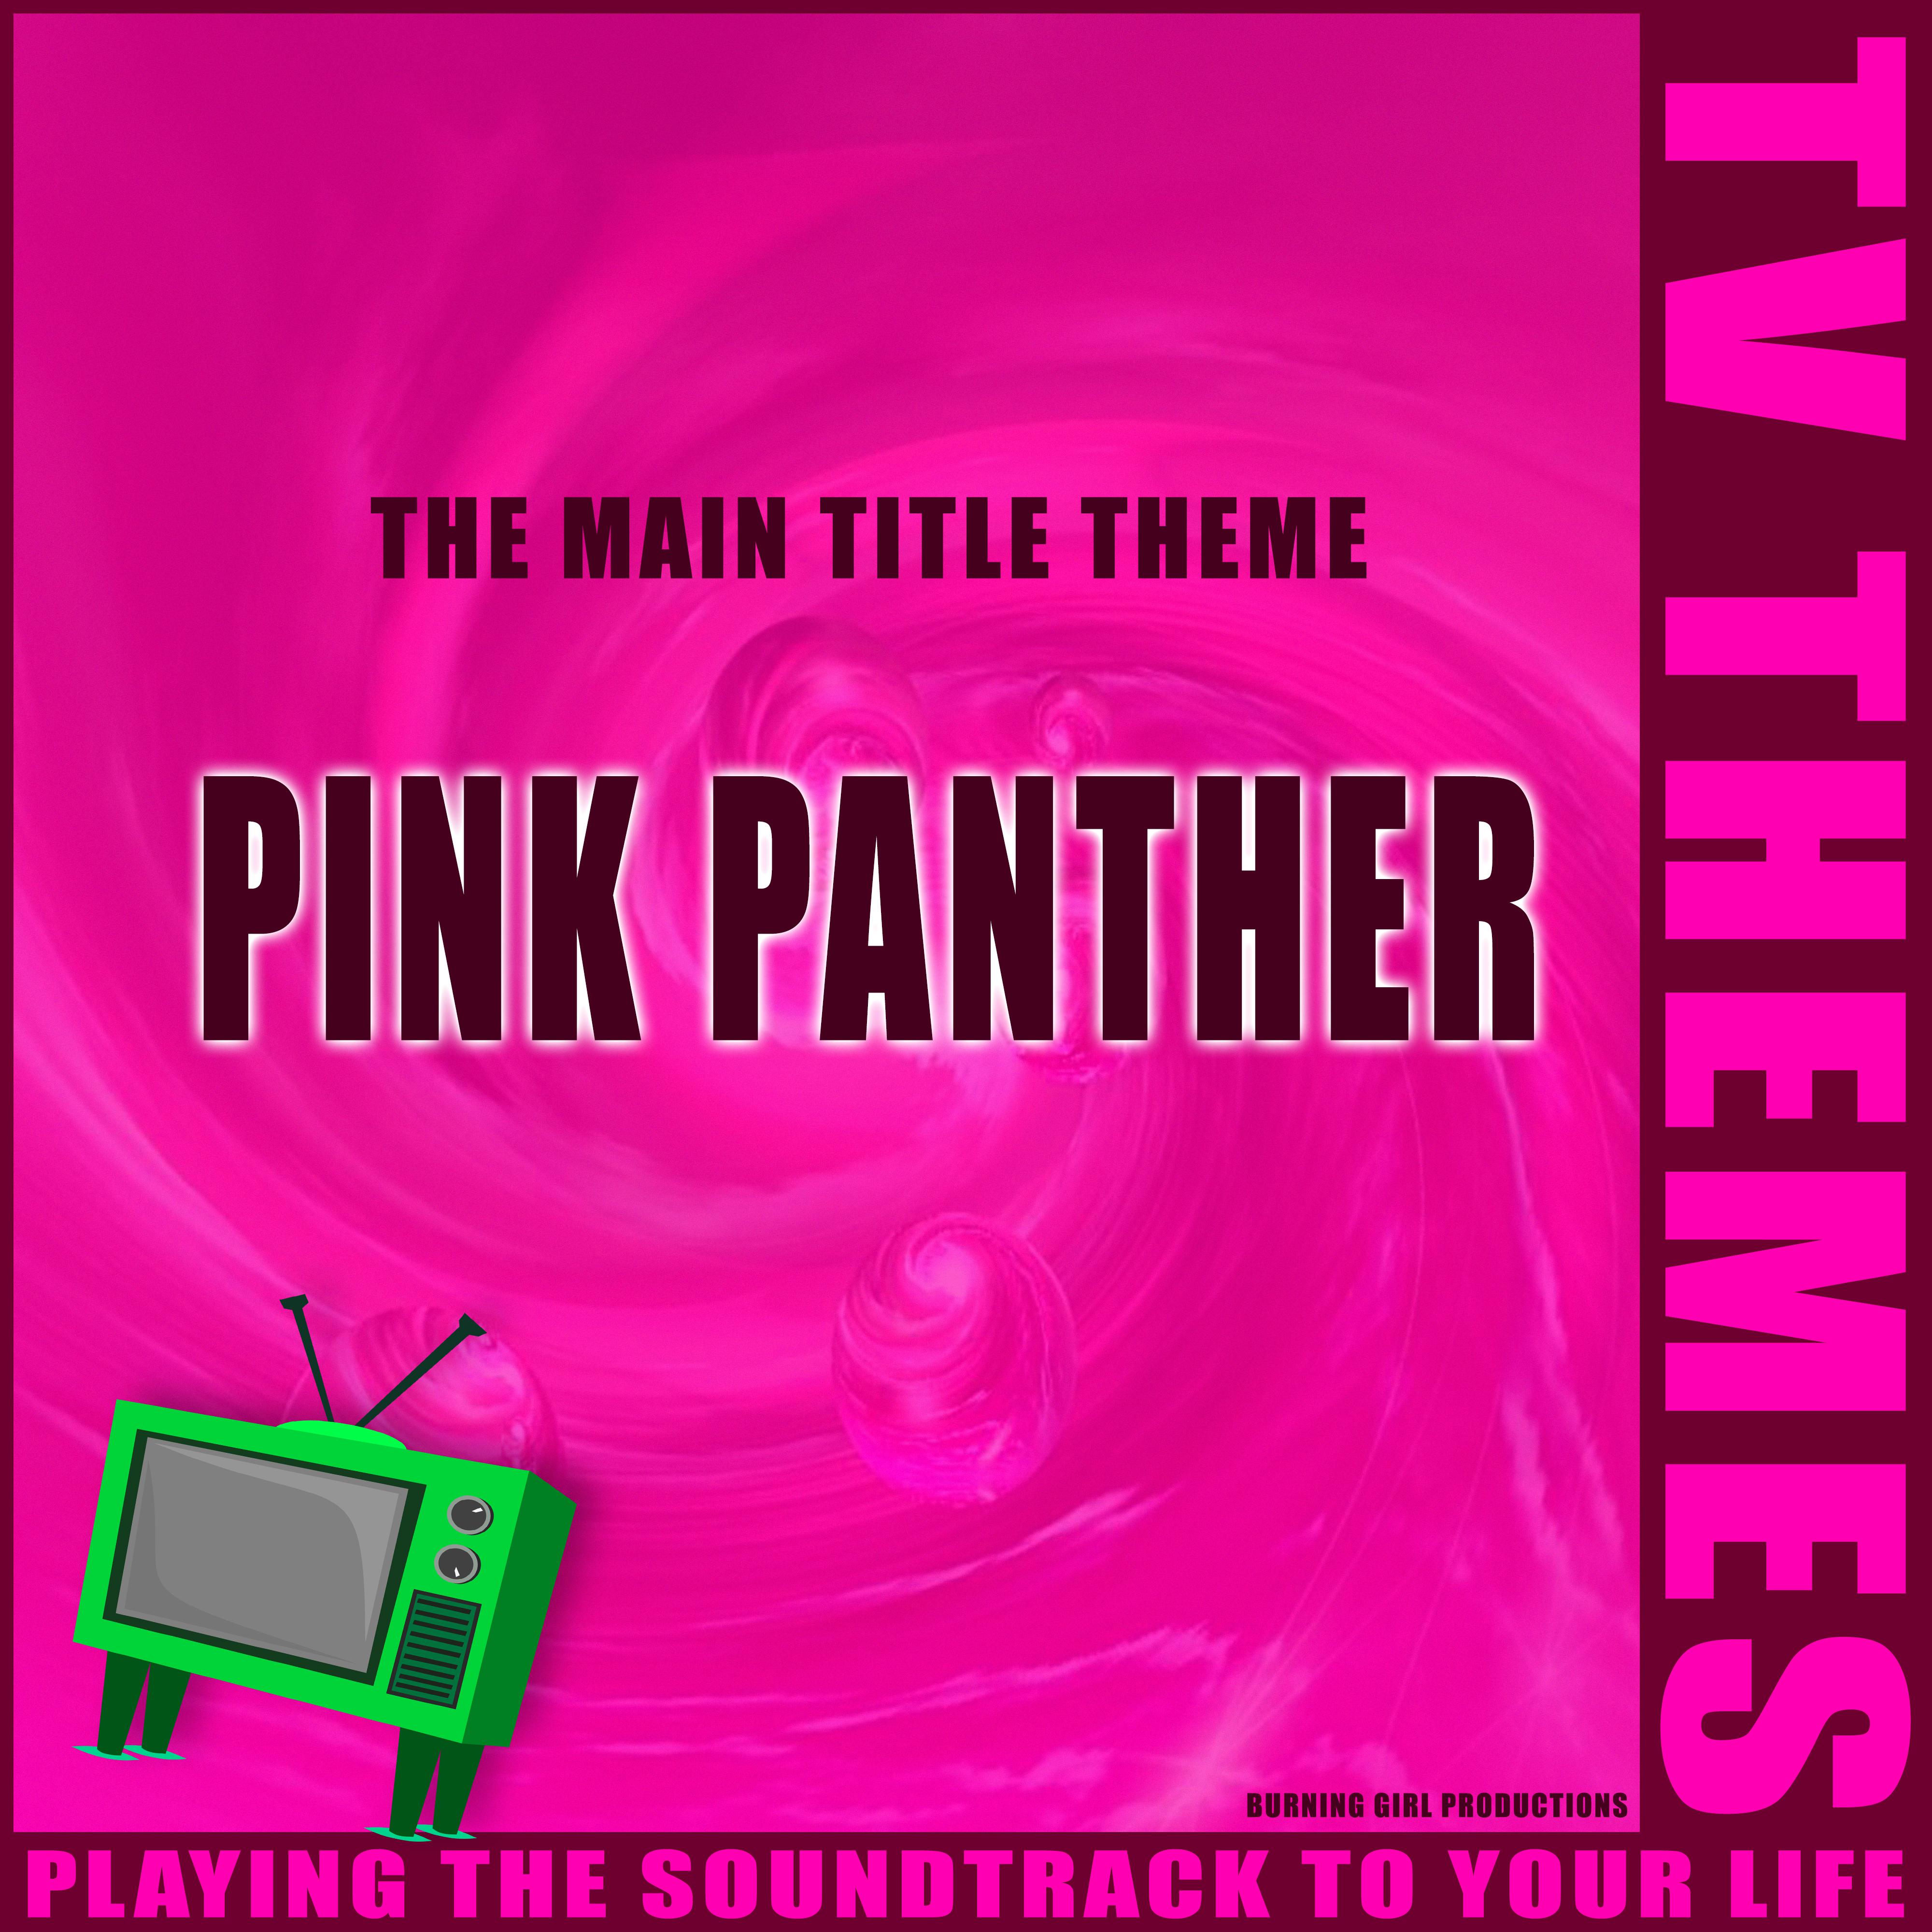 Pink Panther - The Main Title Theme